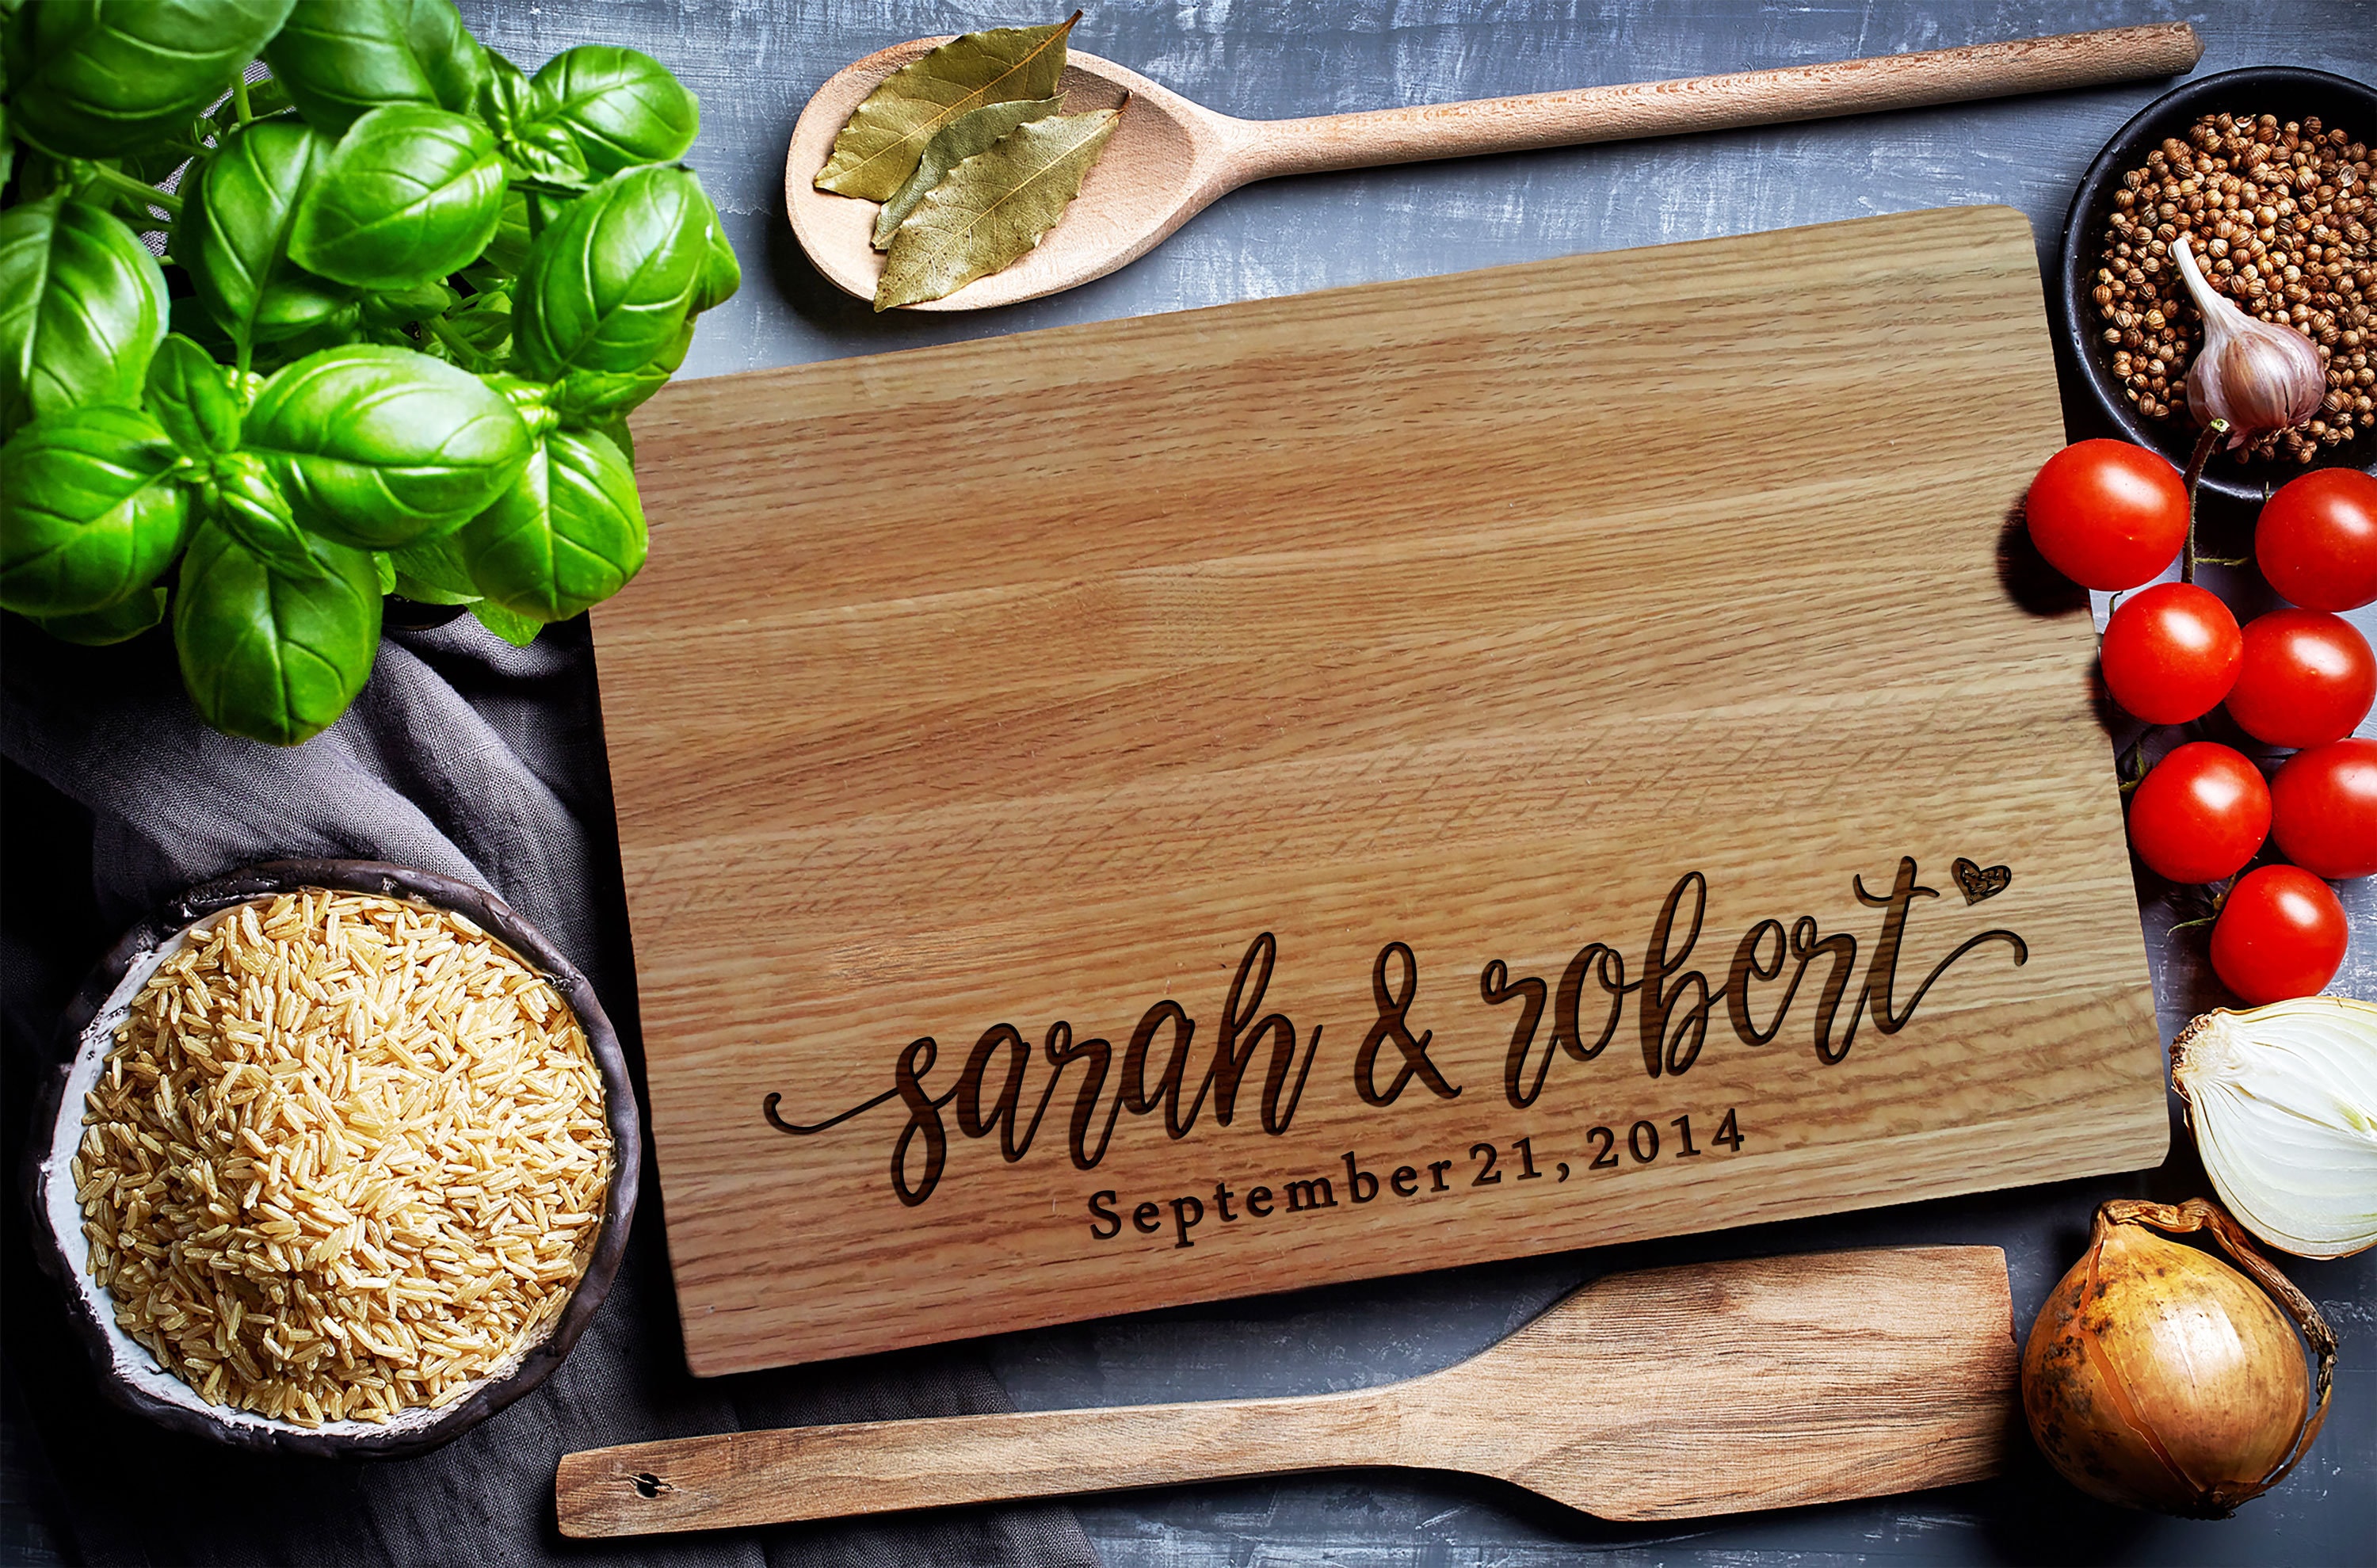 Custom Cutting Board, Personalized Cutting Board, Wedding Gift, Housew –  SayaBell Stamps